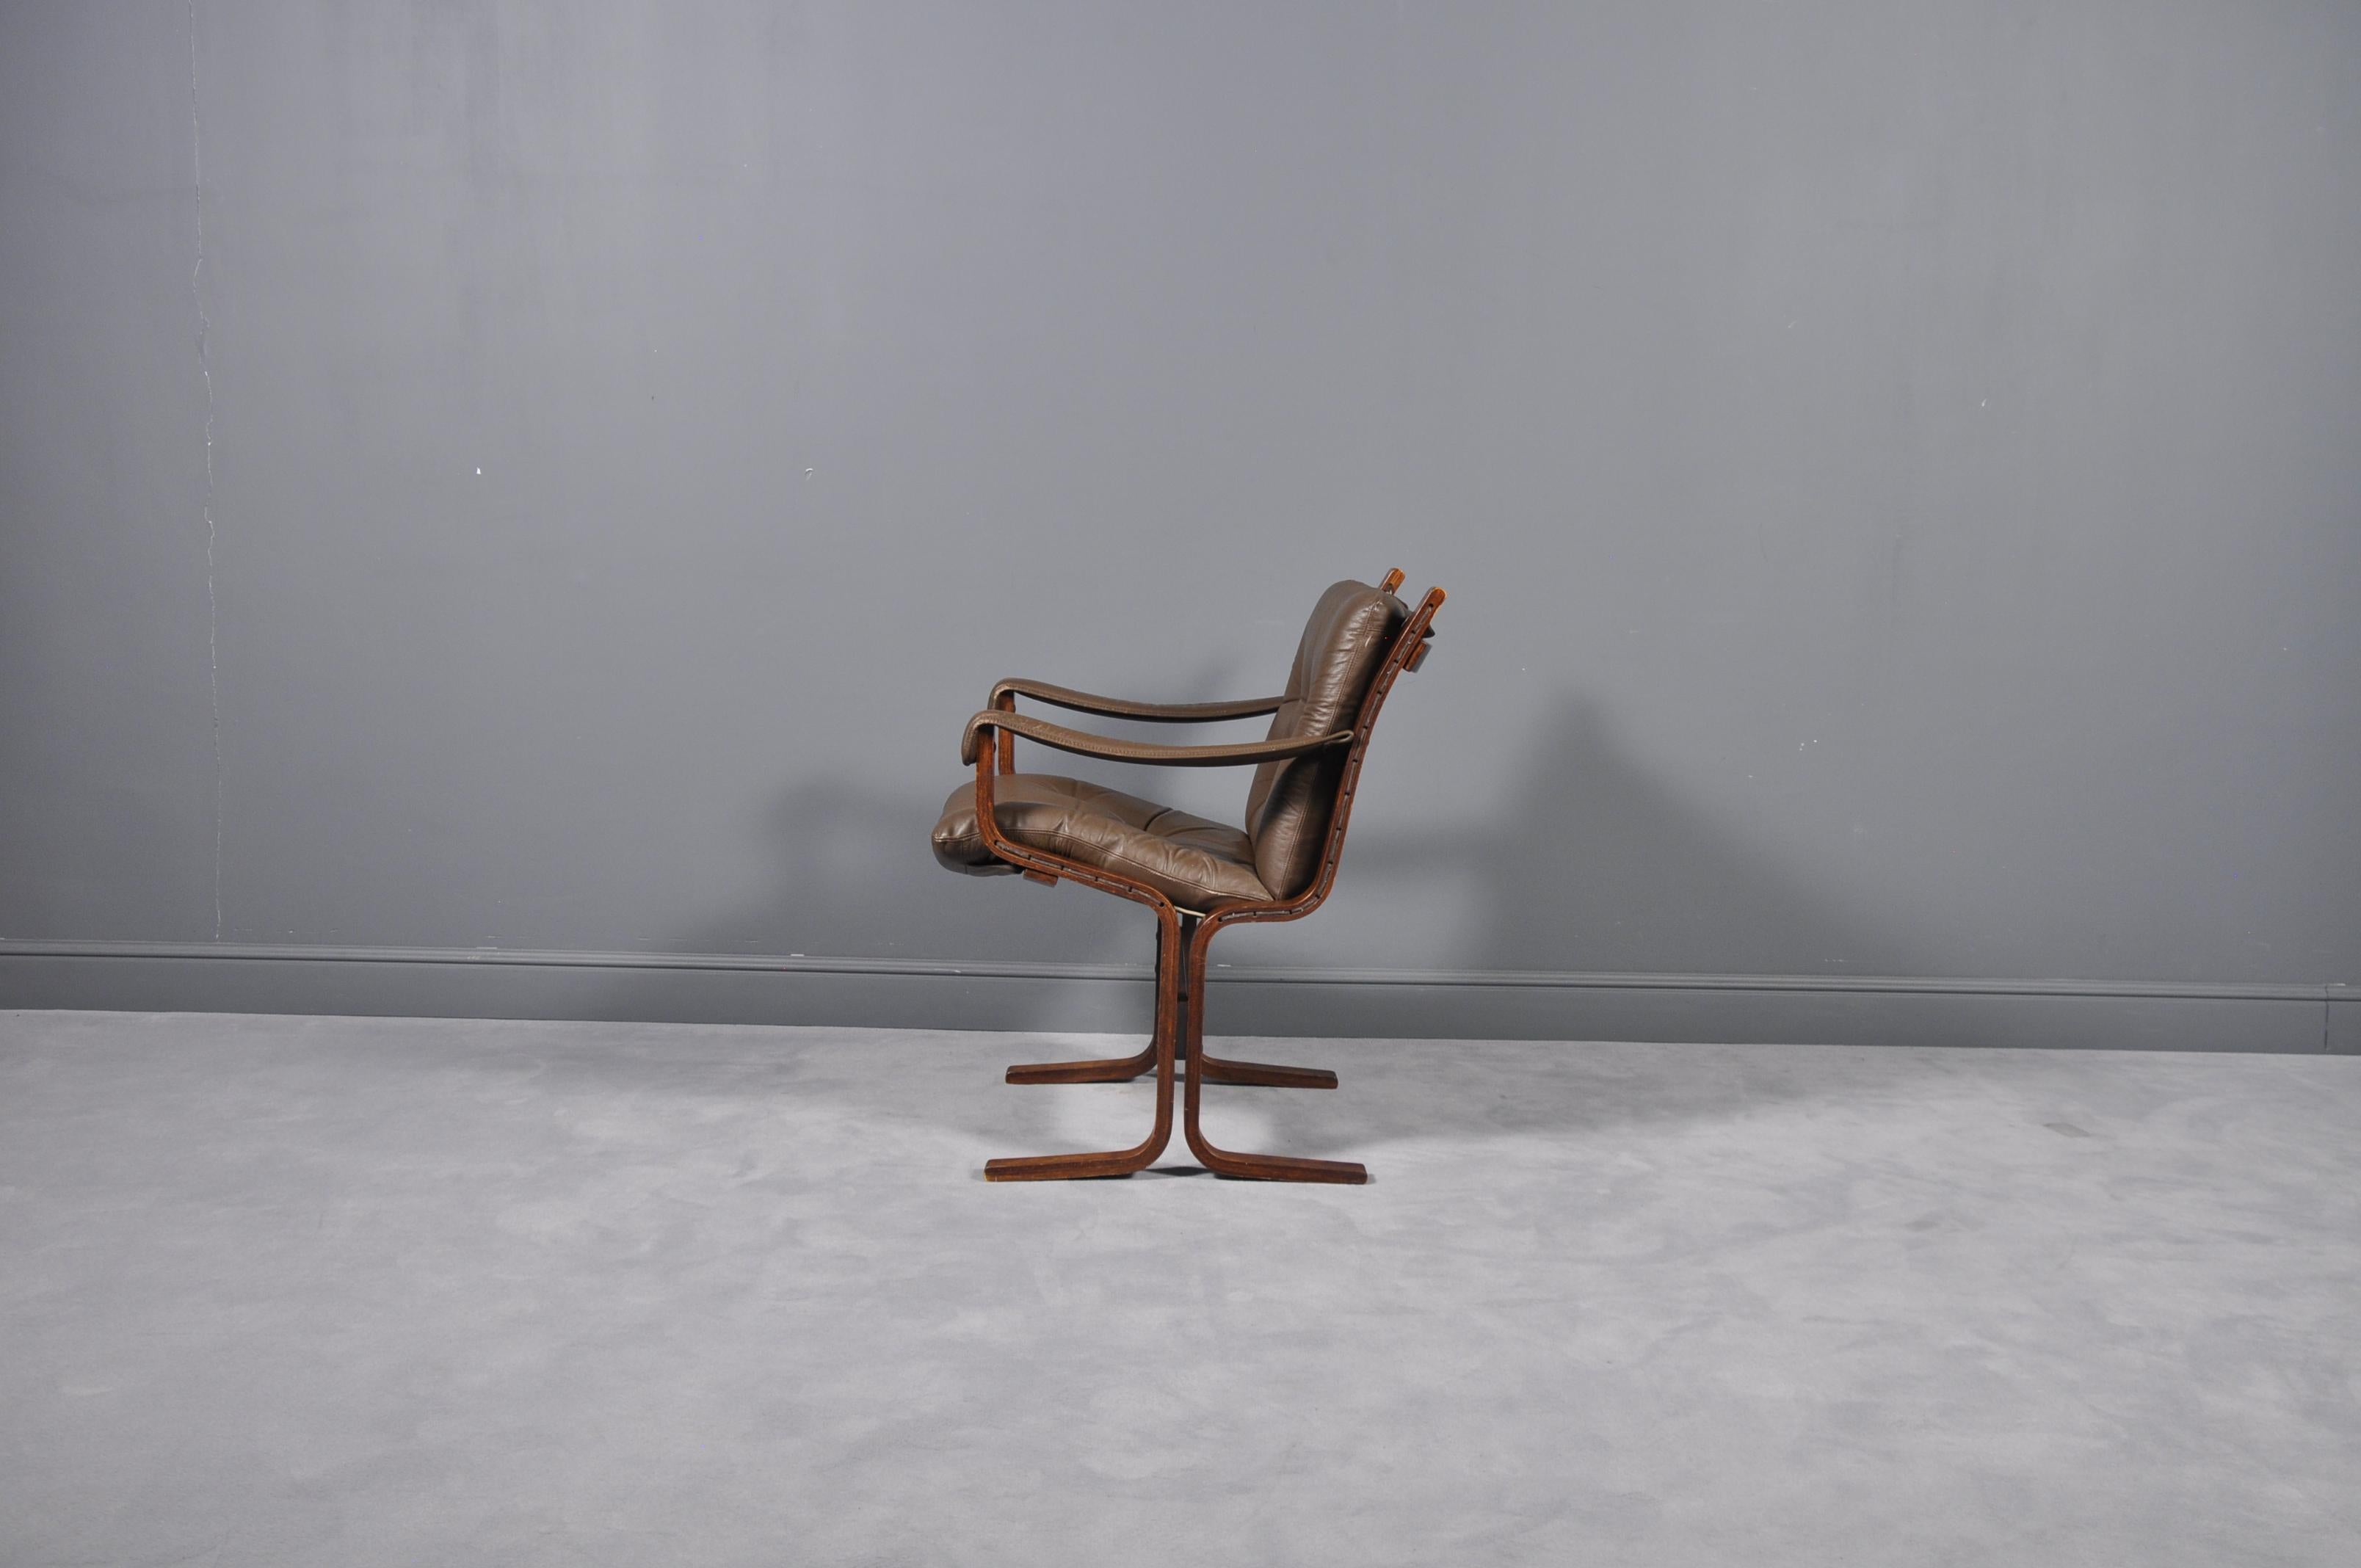 Condition: Very good with only small signs of age related use and wear, in the form of surface rubbing to the front of the left hand arm and some fraying to small areas of the cord to the sides of the chair.

Description: A stylish Norwegian